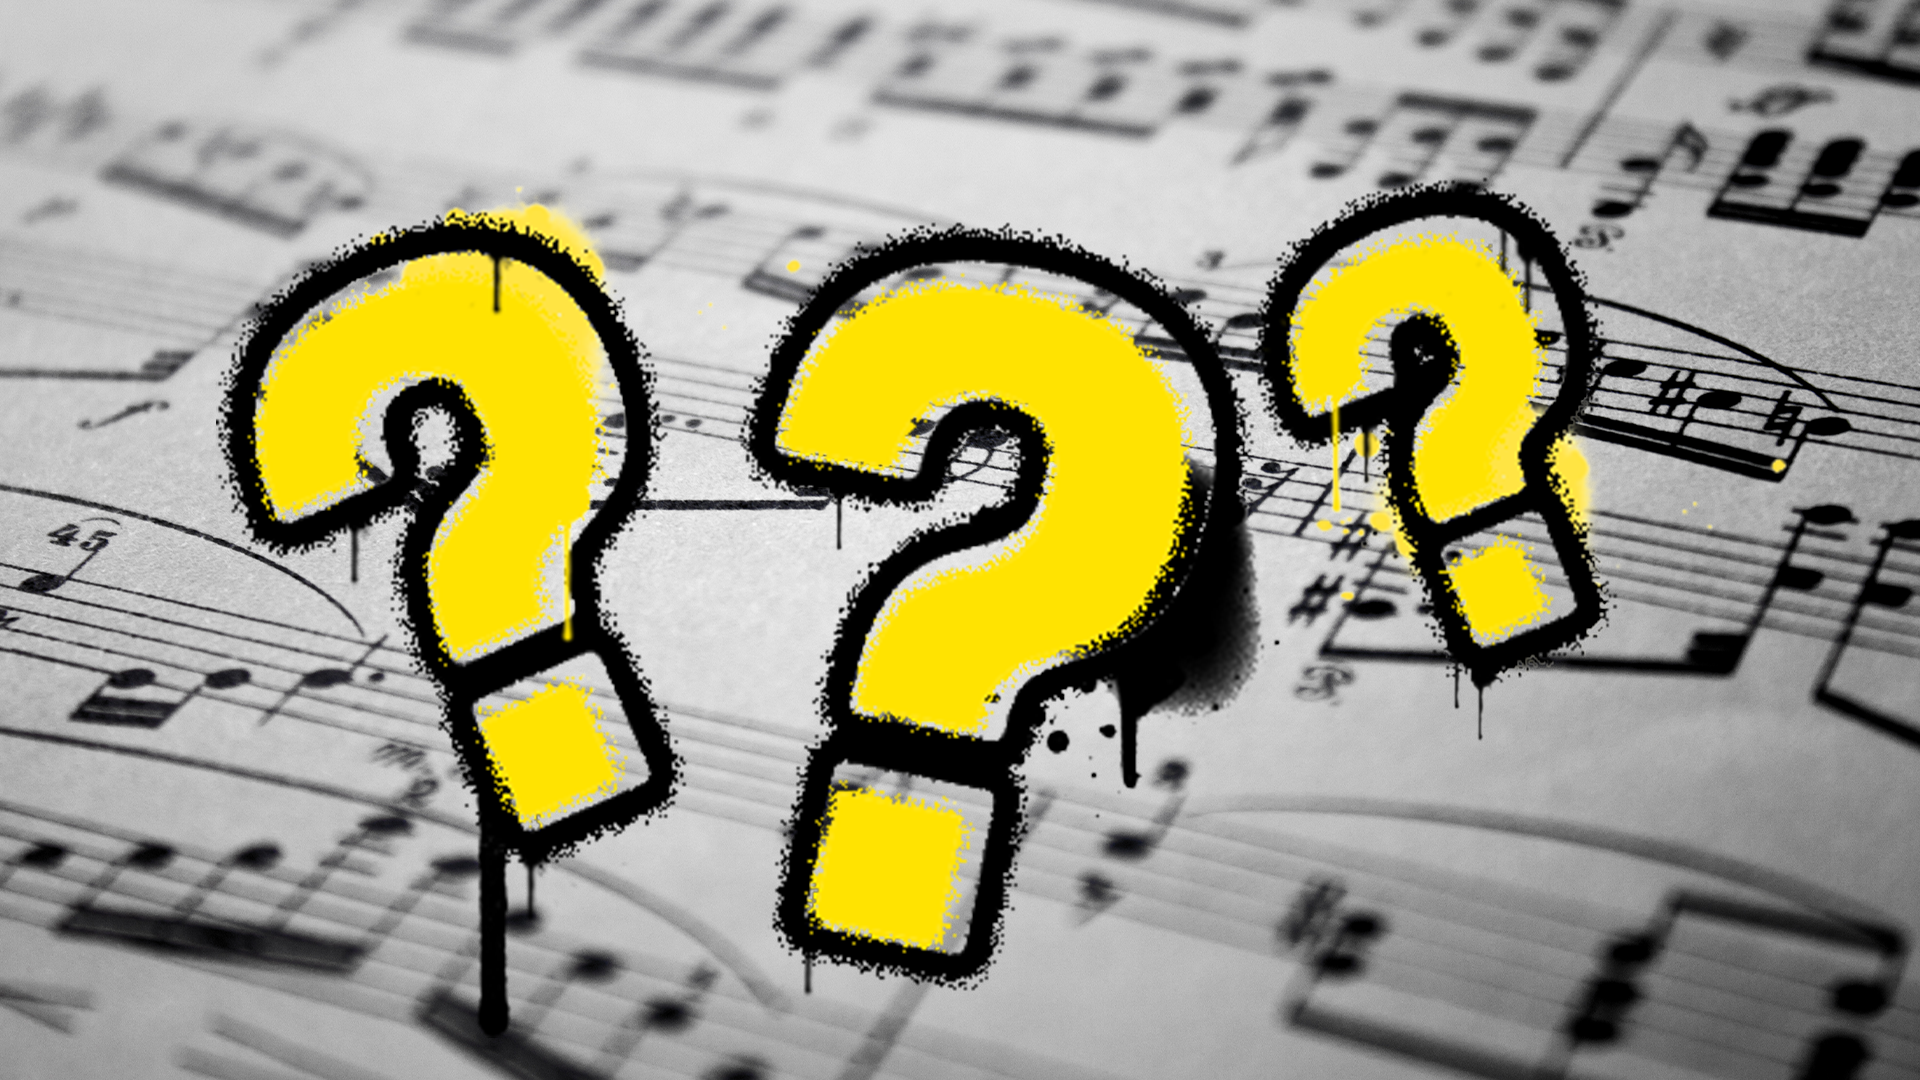 Sheet music and question marks